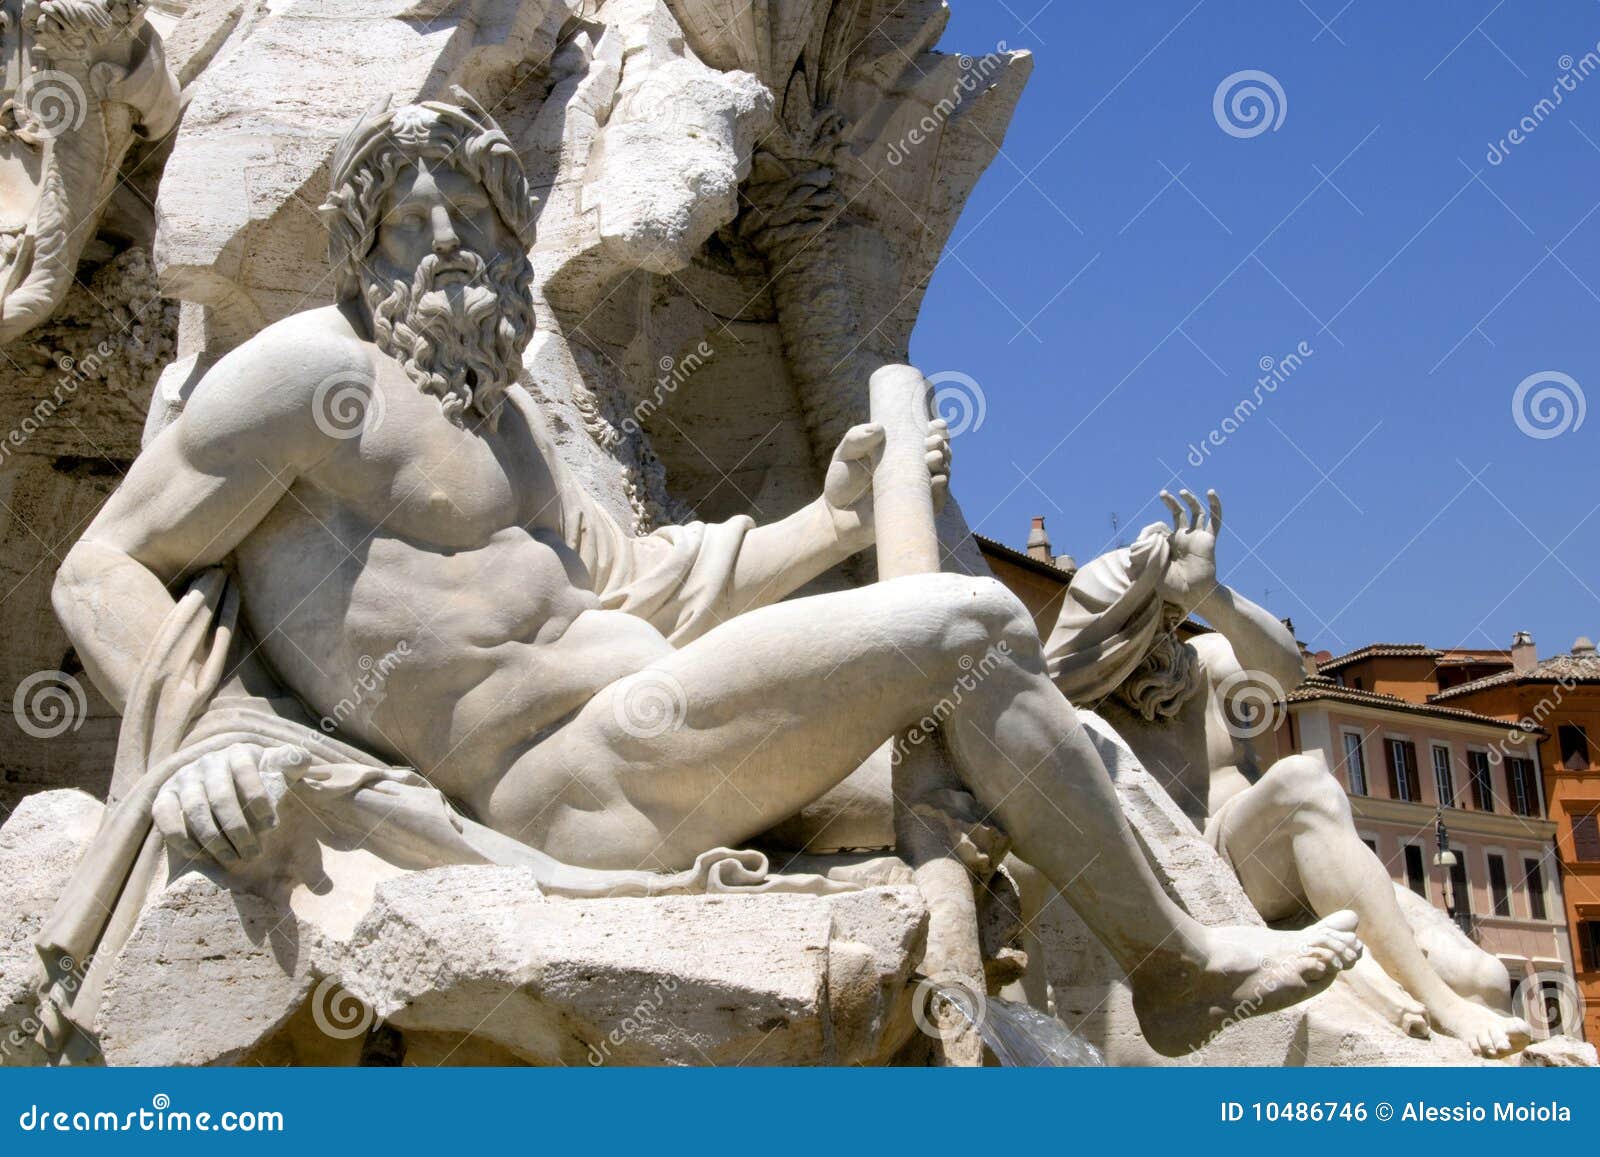 rome: detail of the fountain in piazza navona